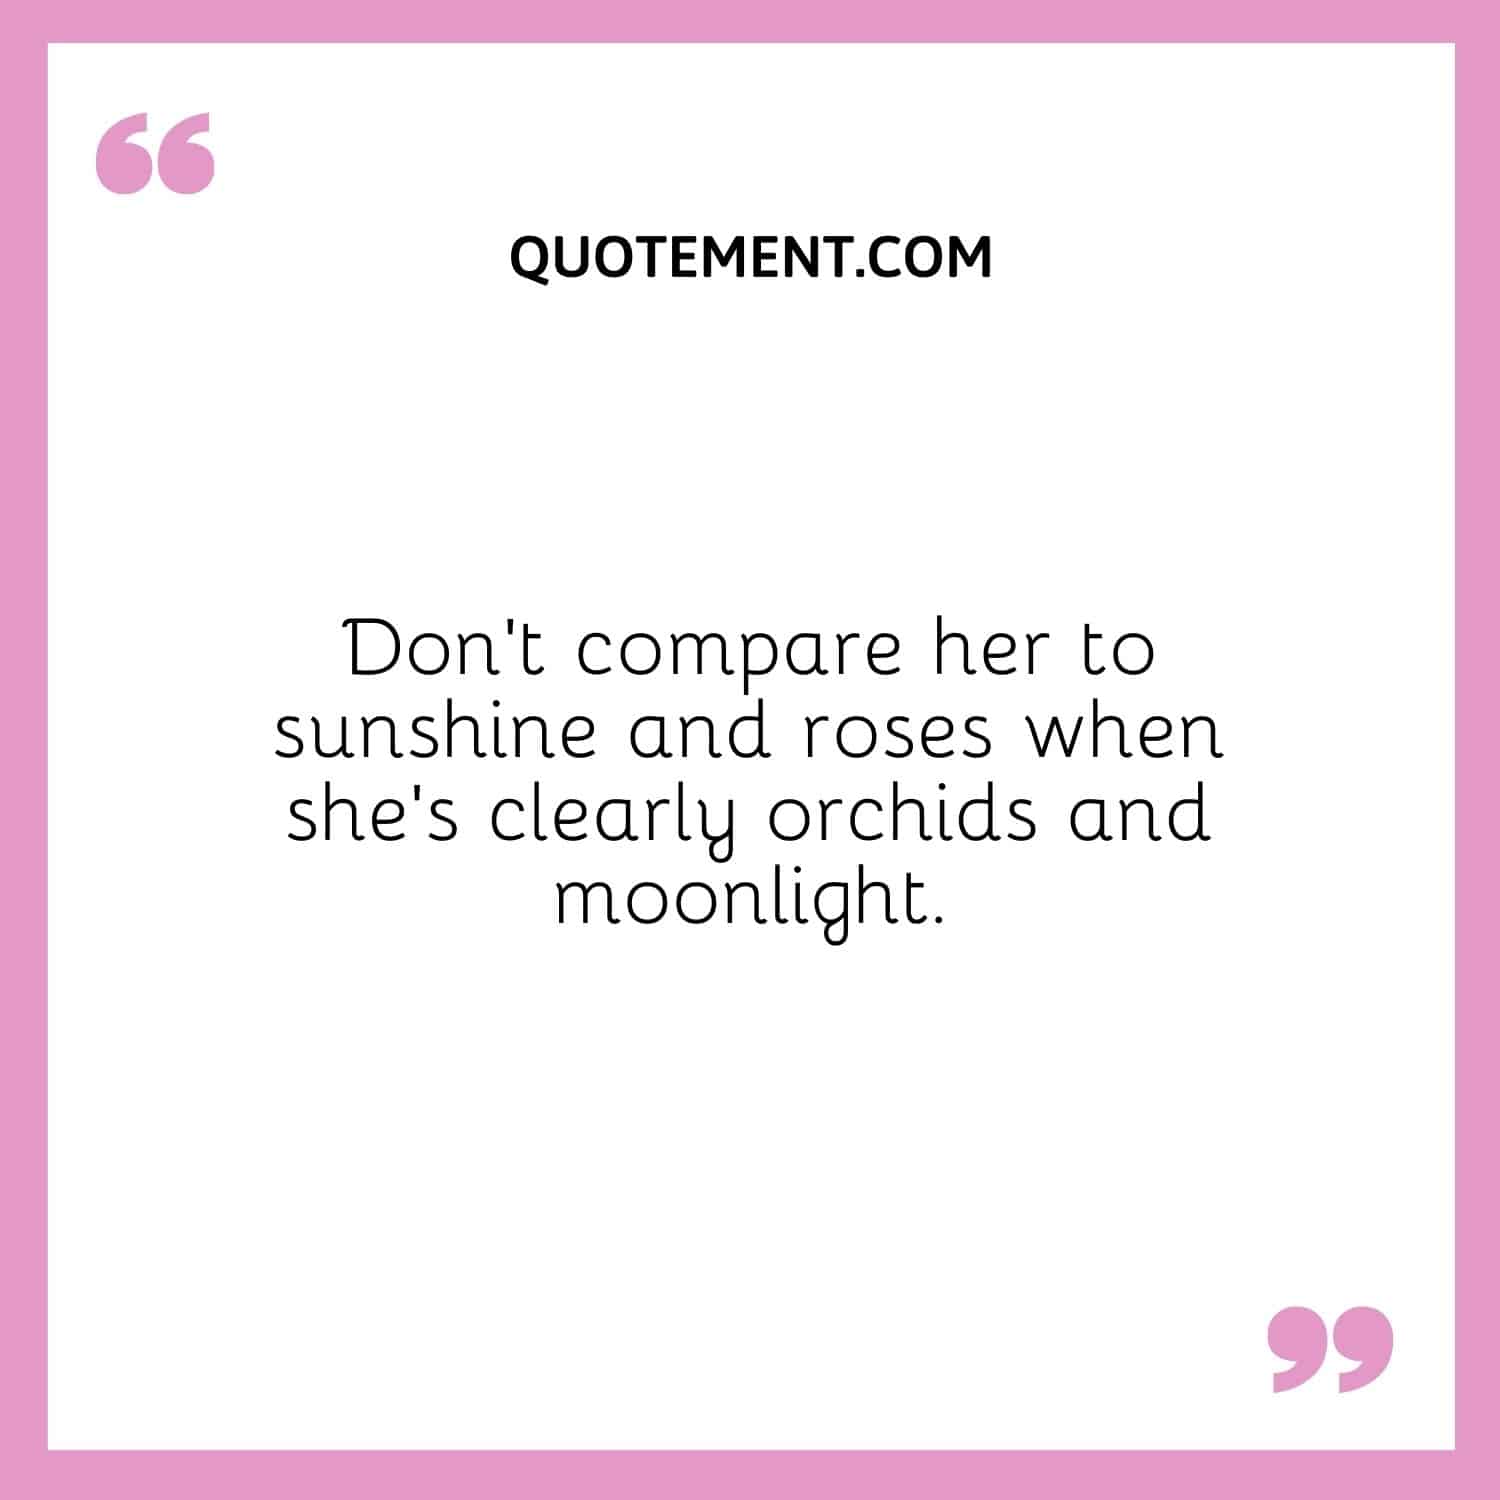 Don’t compare her to sunshine and roses when she’s clearly orchids and moonlight.